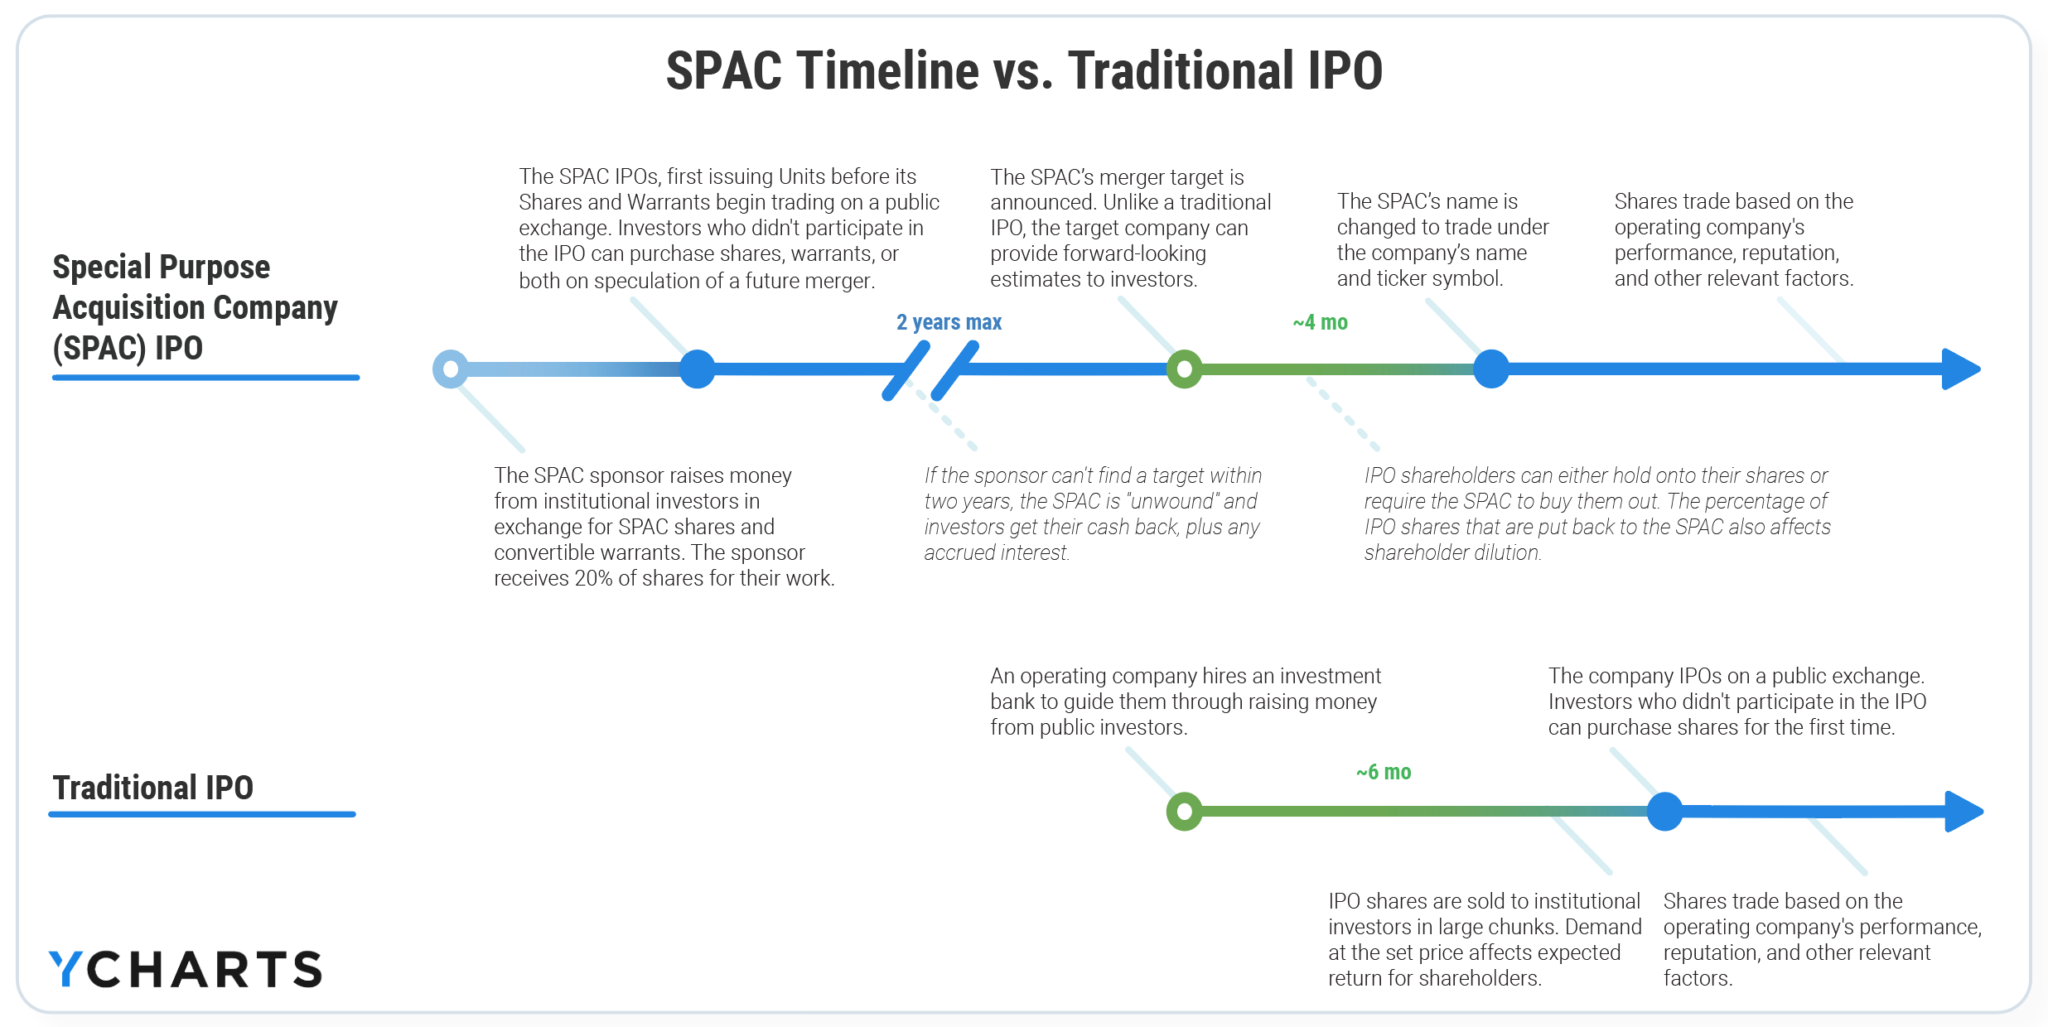 What Happens to Stock Options in a SPAC Merger?